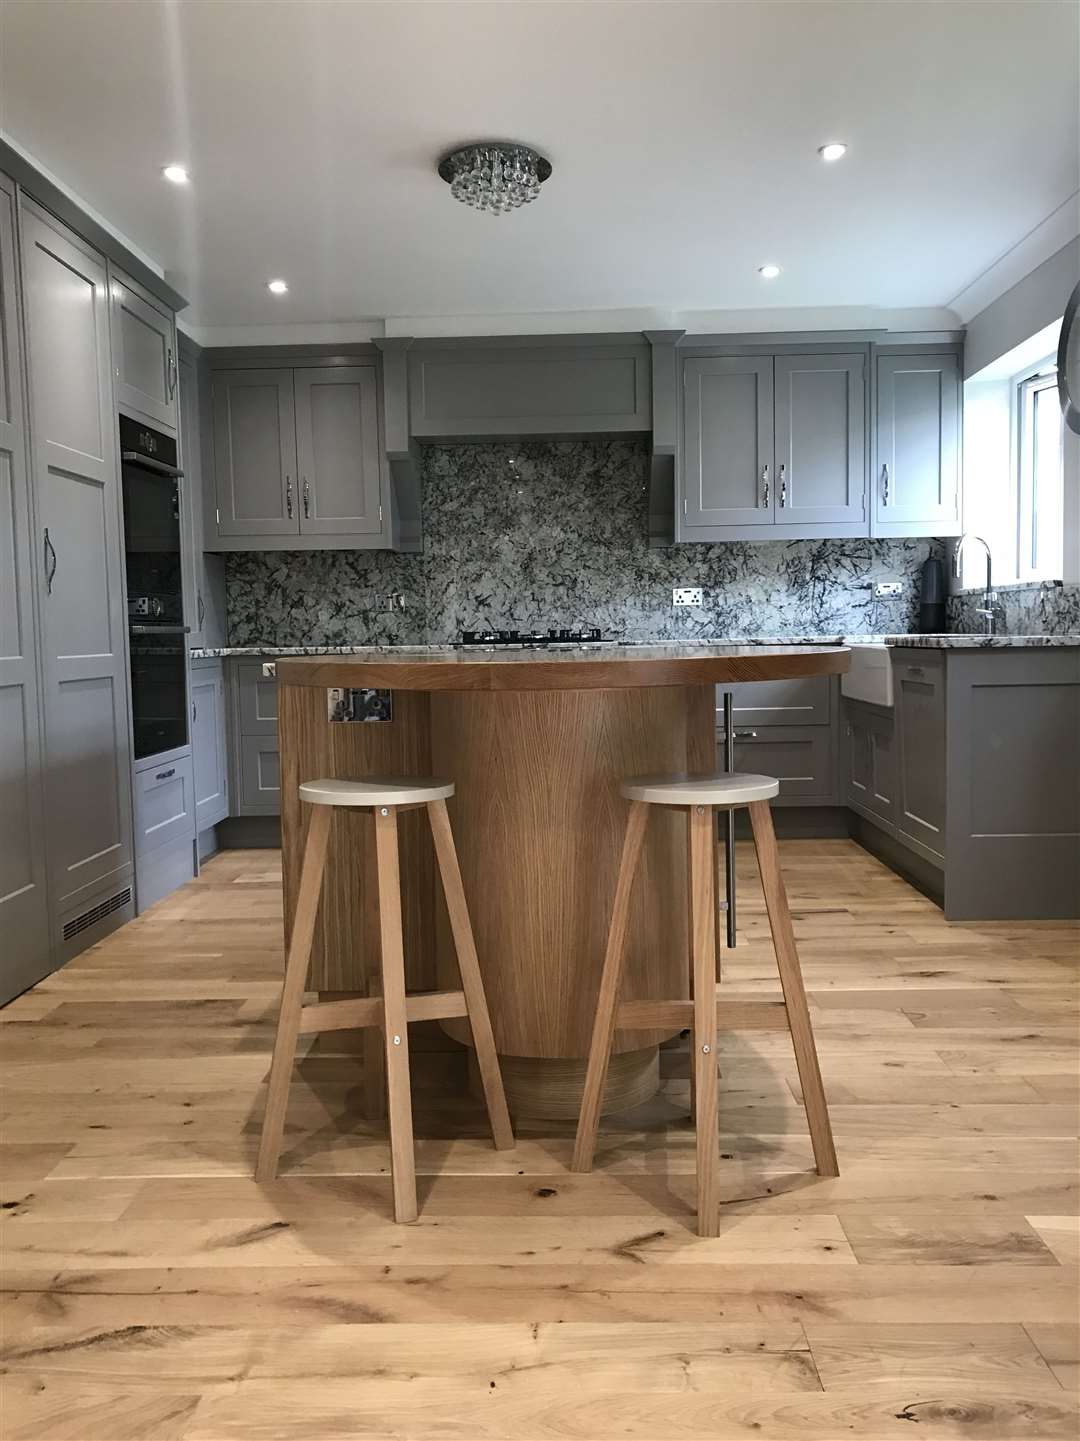 A Wood Works of Westerham fitted kitchen